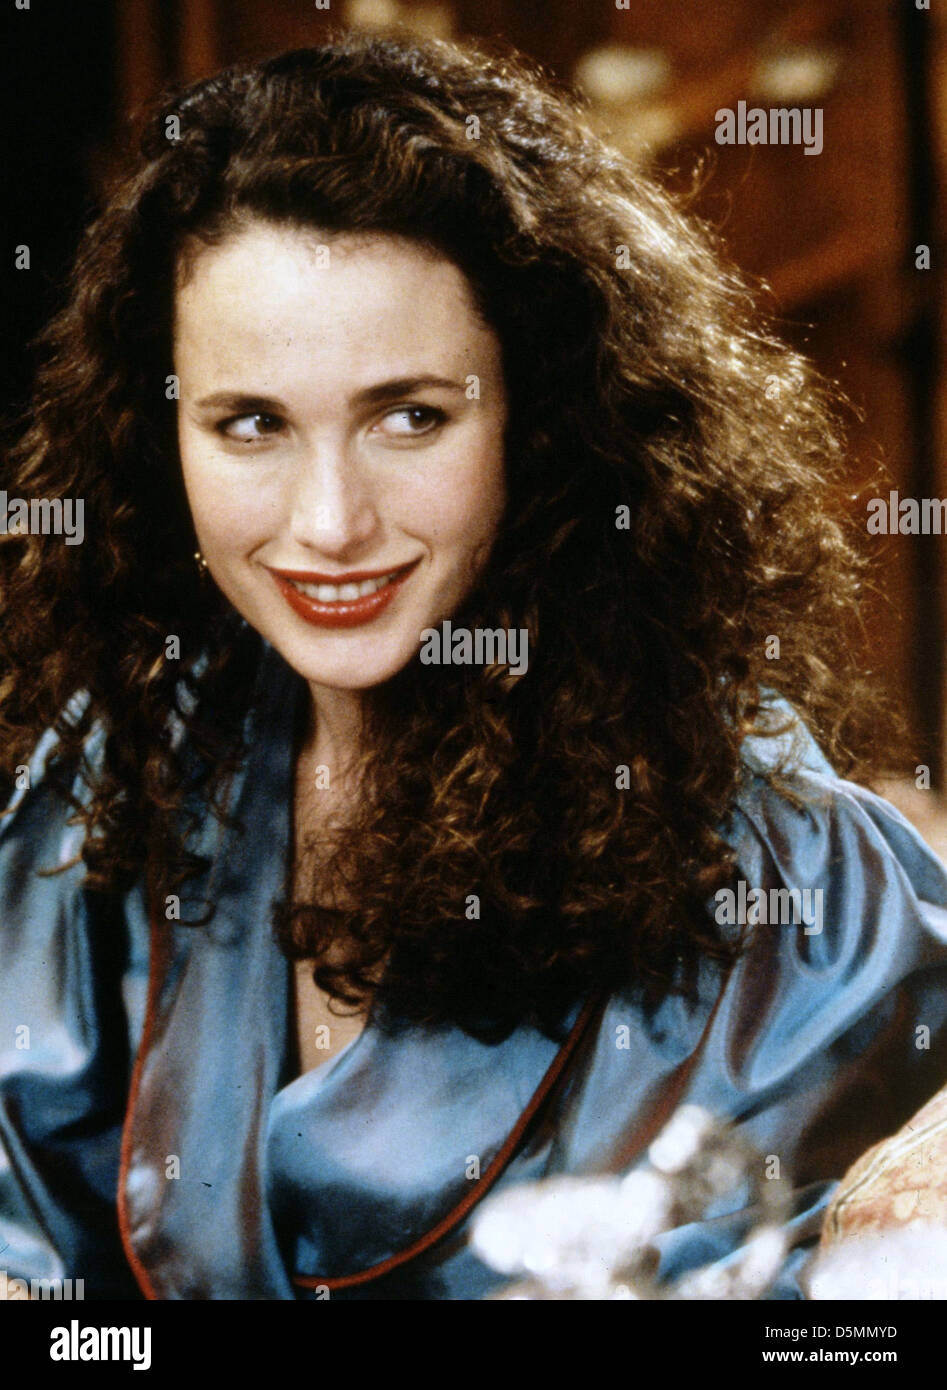 Andie Macdowell High Resolution Stock Photography and Images - Alamy